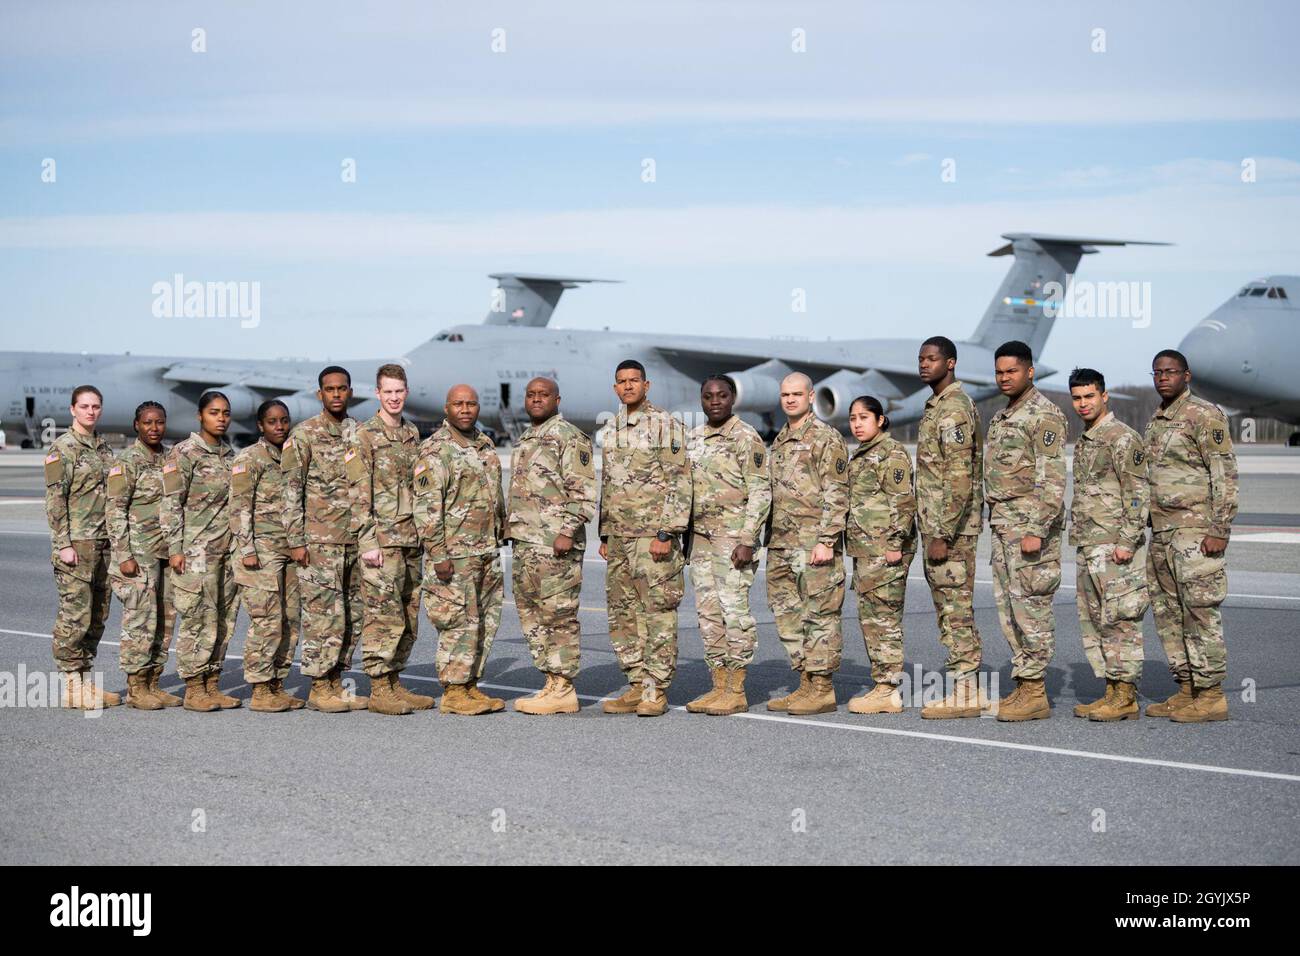 Members of the Army’s 622nd Movement Control Team, Joint Base Langley-Eustis, Va., pose for a photo Jan. 10, 2020, on Dover Air Force Base, Del. Sixteen members from the 622nd MCT came to Dover AFB for cargo and personnel processing training. (U.S. Air Force photo by Roland Balik) Stock Photo